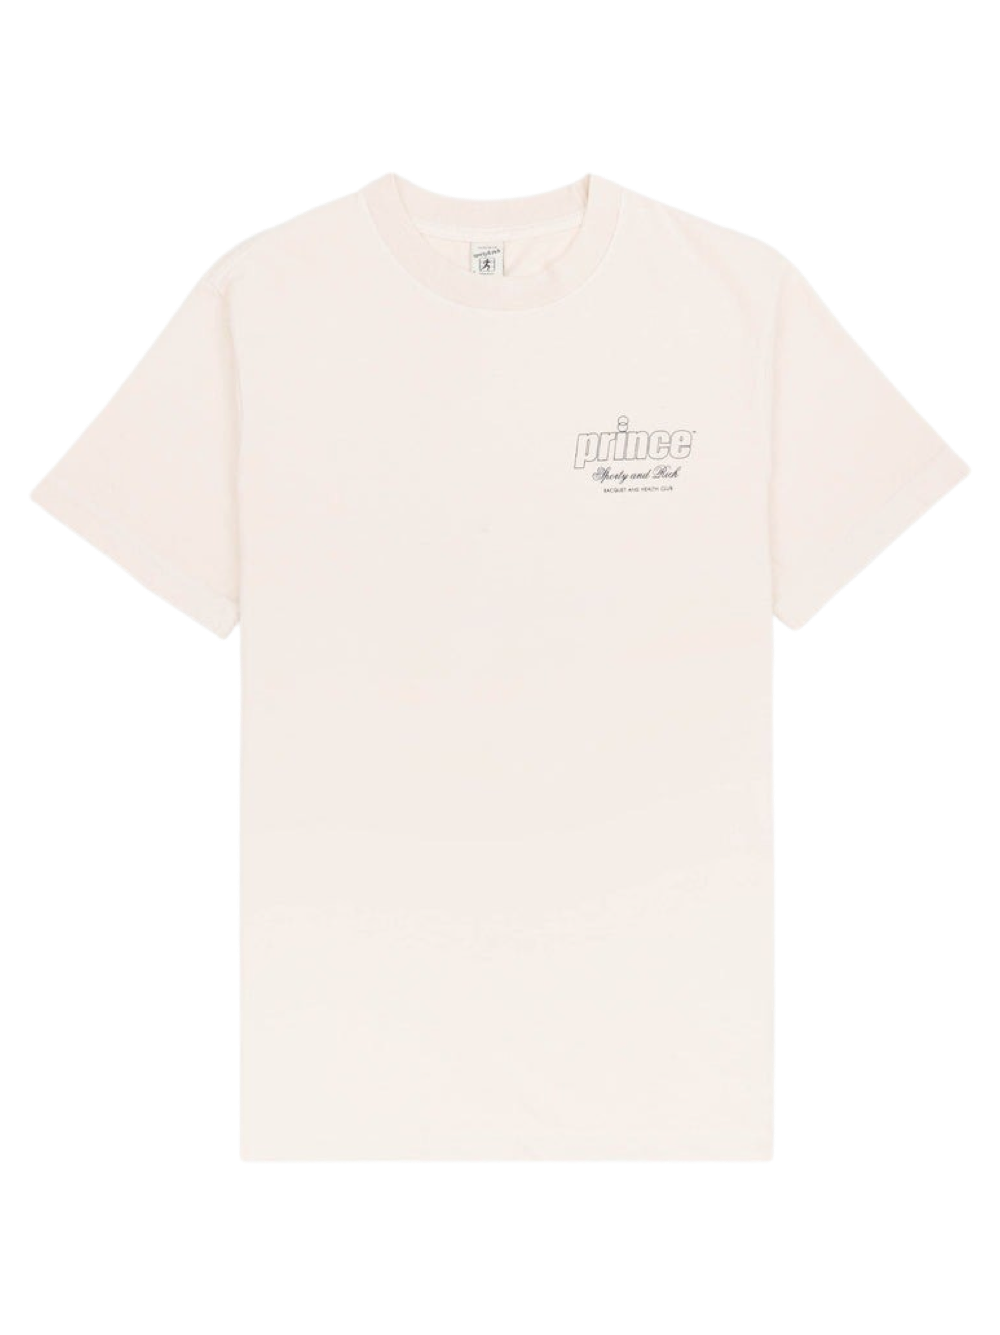 Sporty & Rich Prince Health T-Shirt in Cream